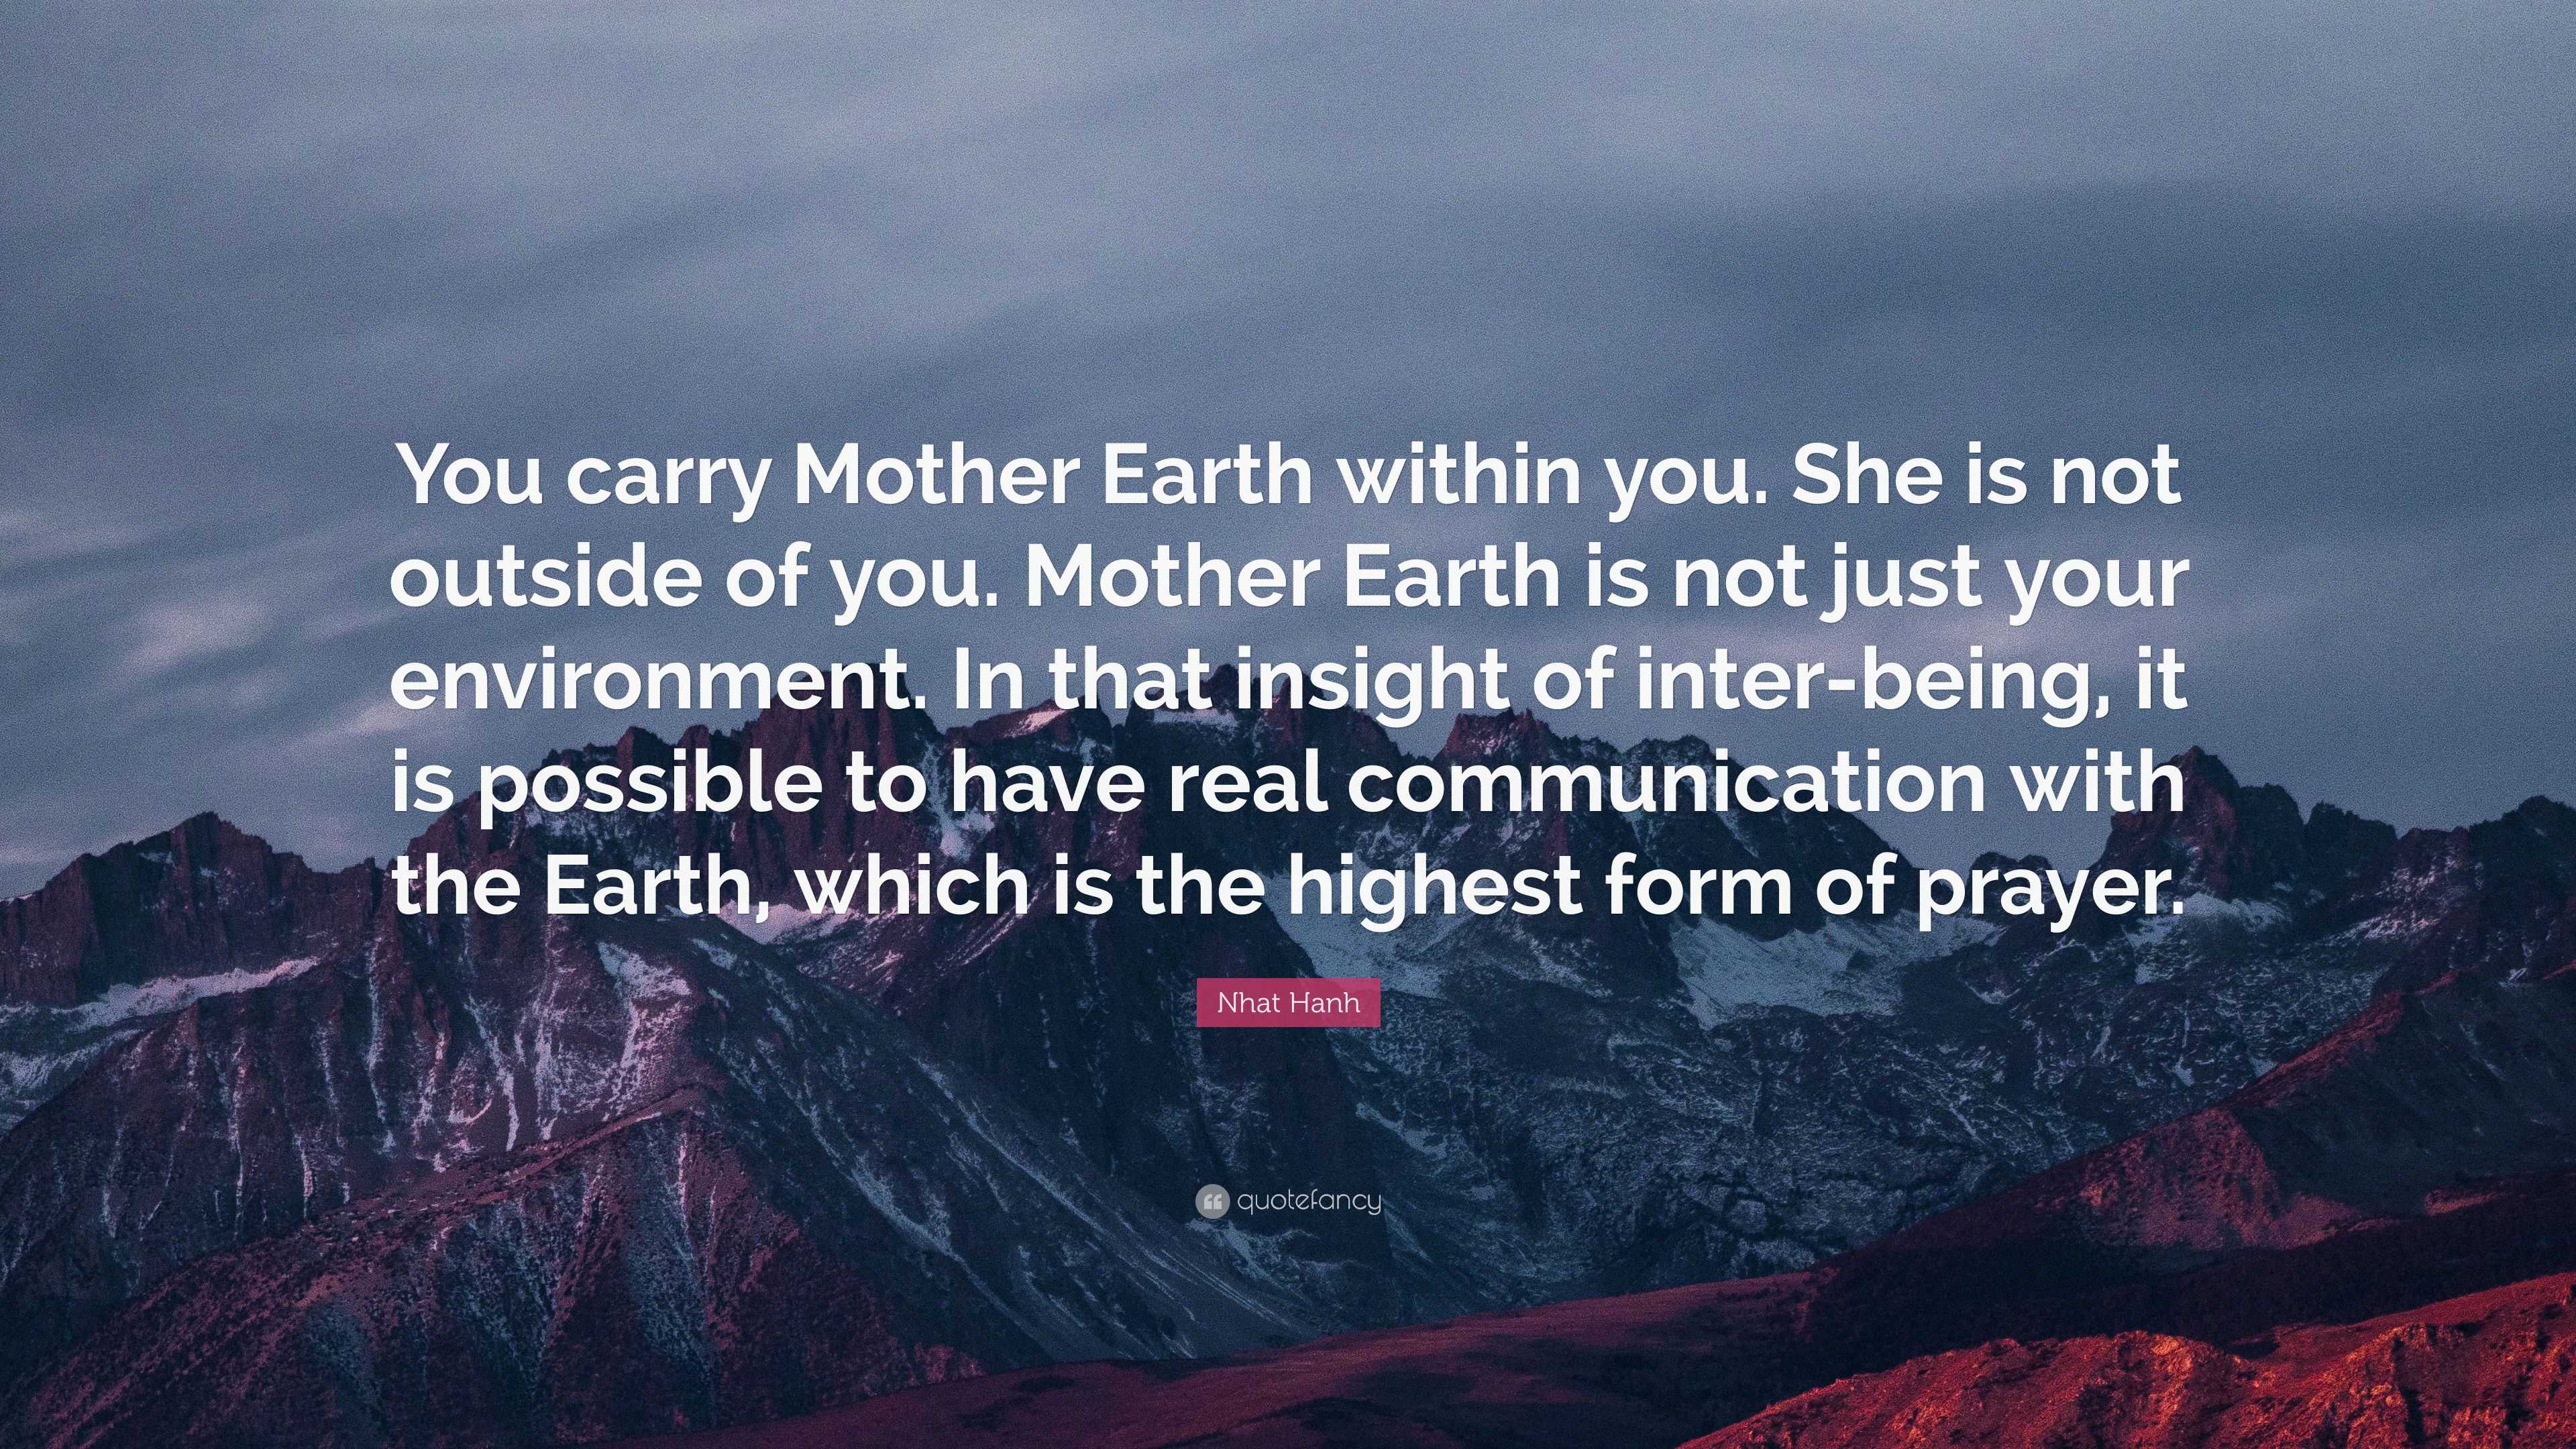 Nhat Hanh Quote “You carry Mother Earth within you She is not outside